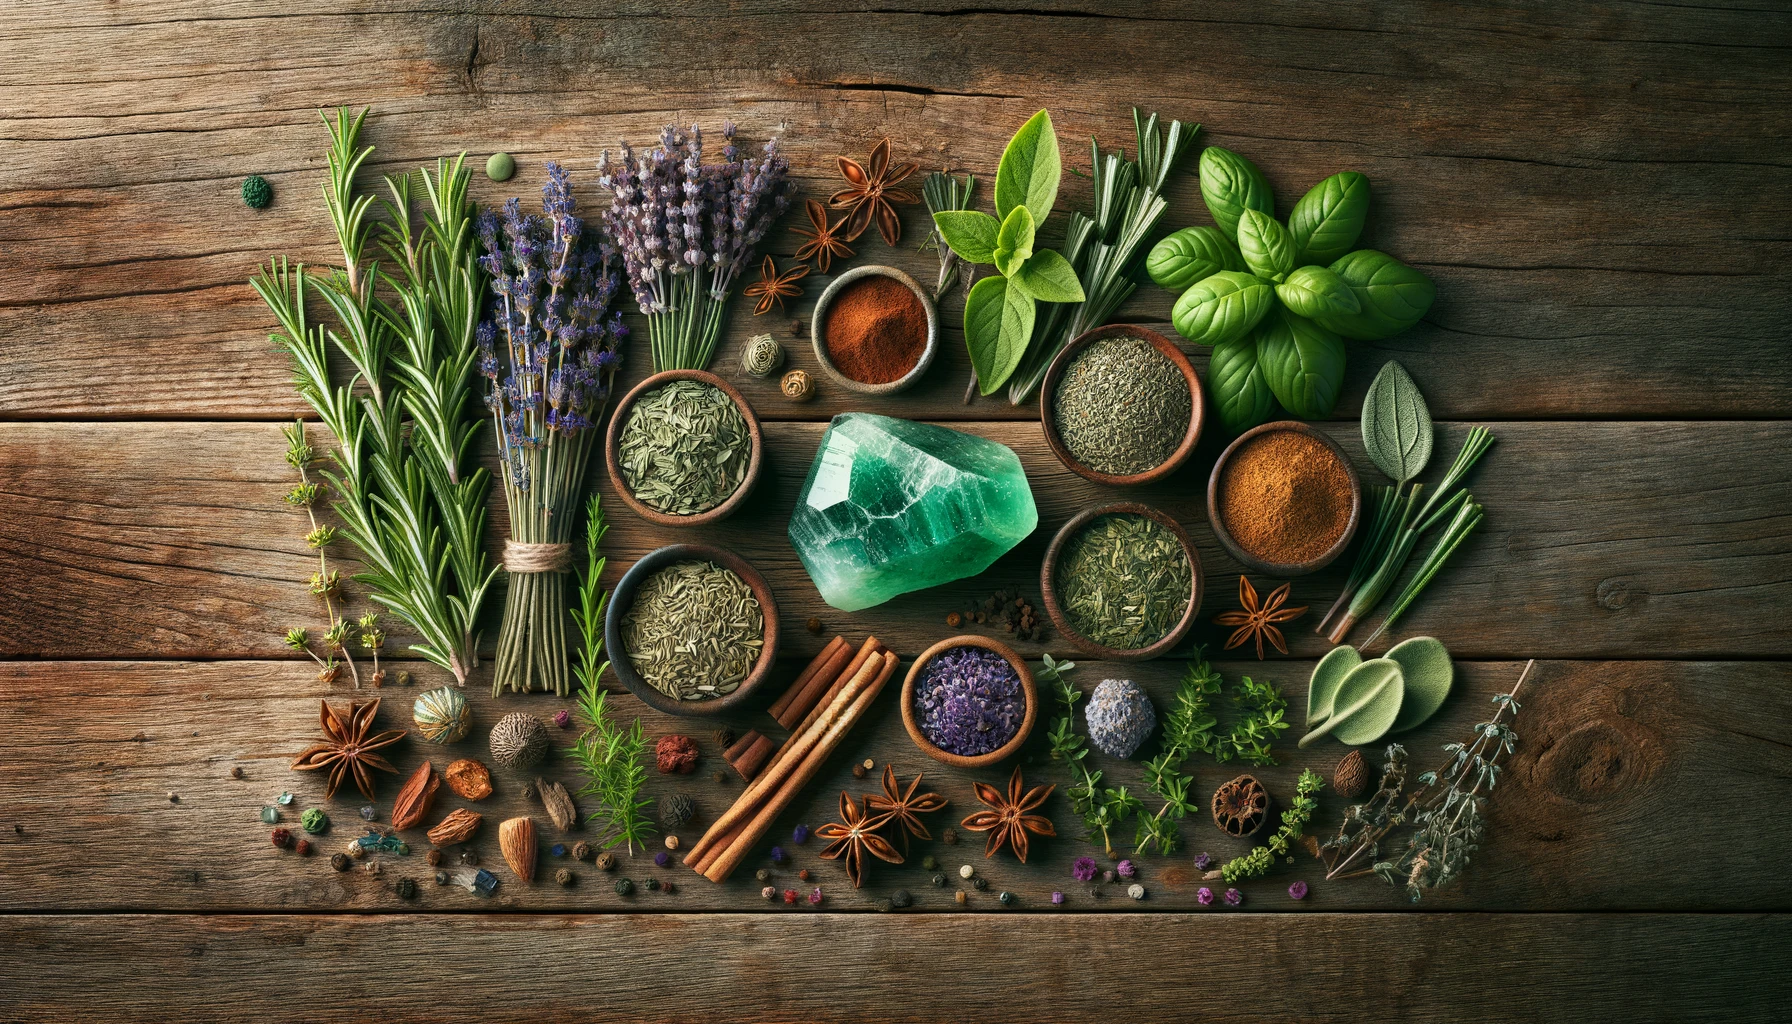 A serene collection of assorted herbs and spices, including rosemary, thyme, lavender, cinnamon sticks, and star anise, neatly arranged with a shimmering green aventurine crystal on a rustic wooden surface, highlighting natural beauty and simplicity.